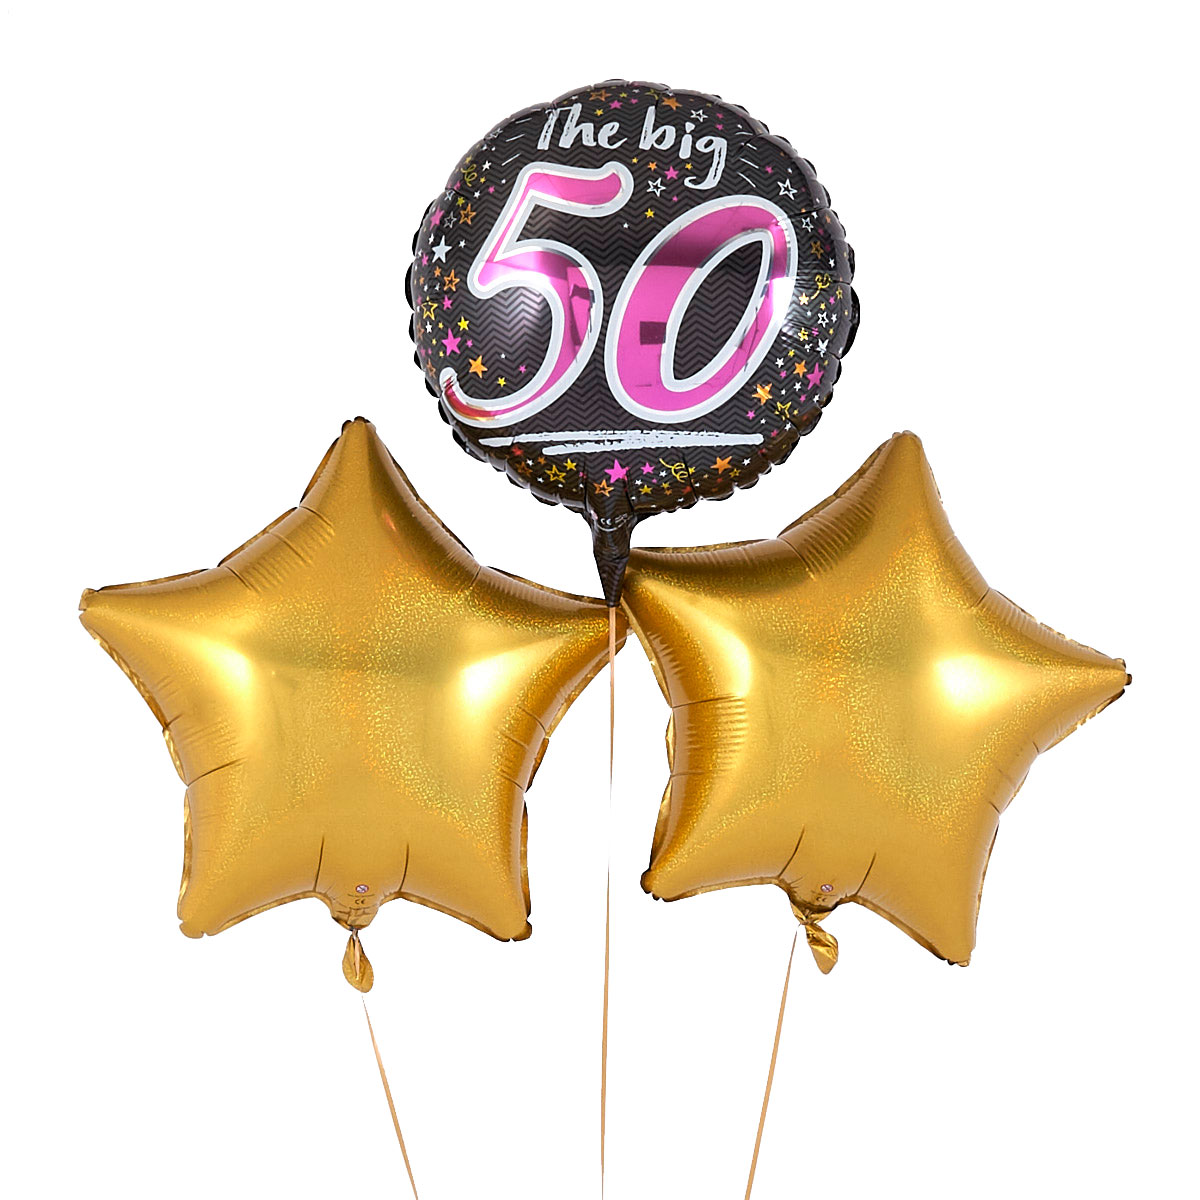 The Big 50' Black, Pink & Gold Balloon Bouquet - DELIVERED INFLATED!